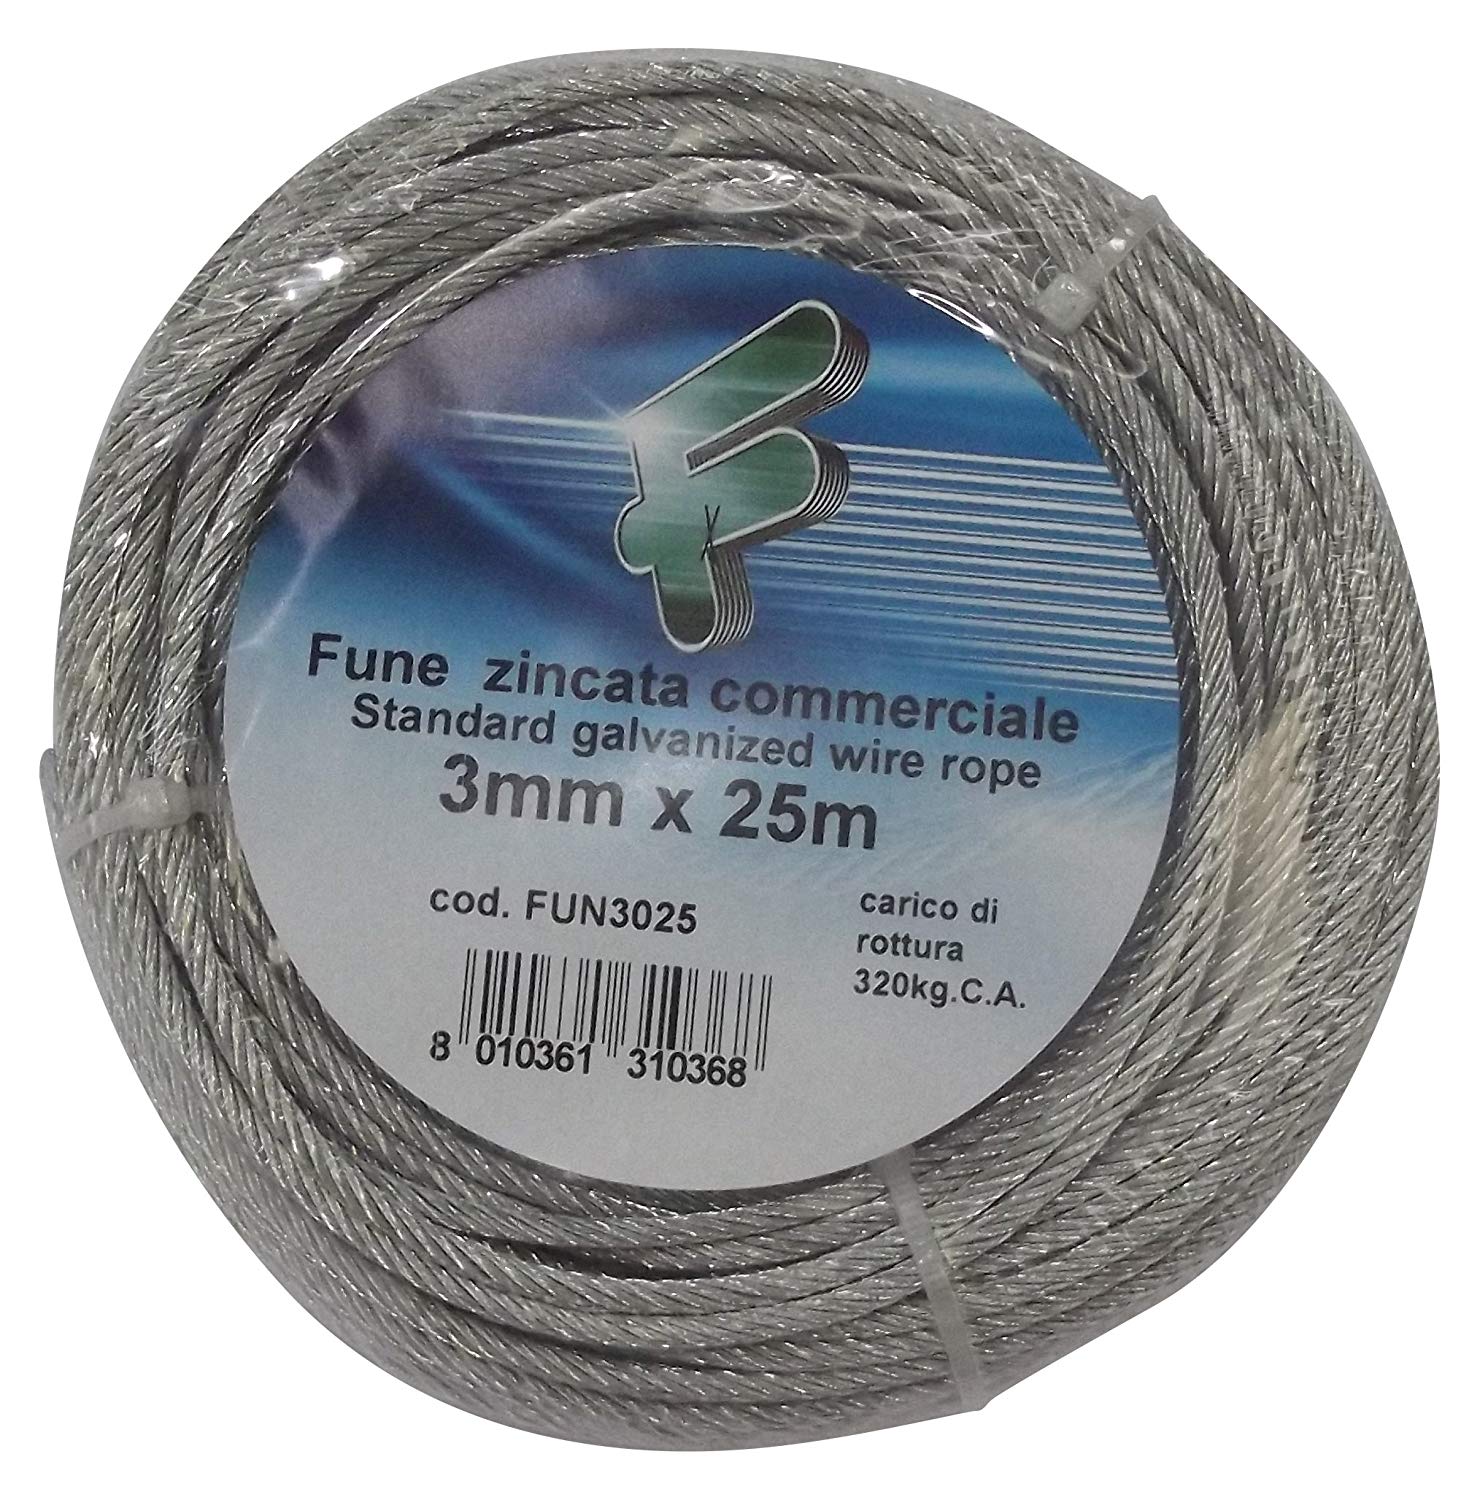 FILOMAT WIRE ROPE 4mm 25M